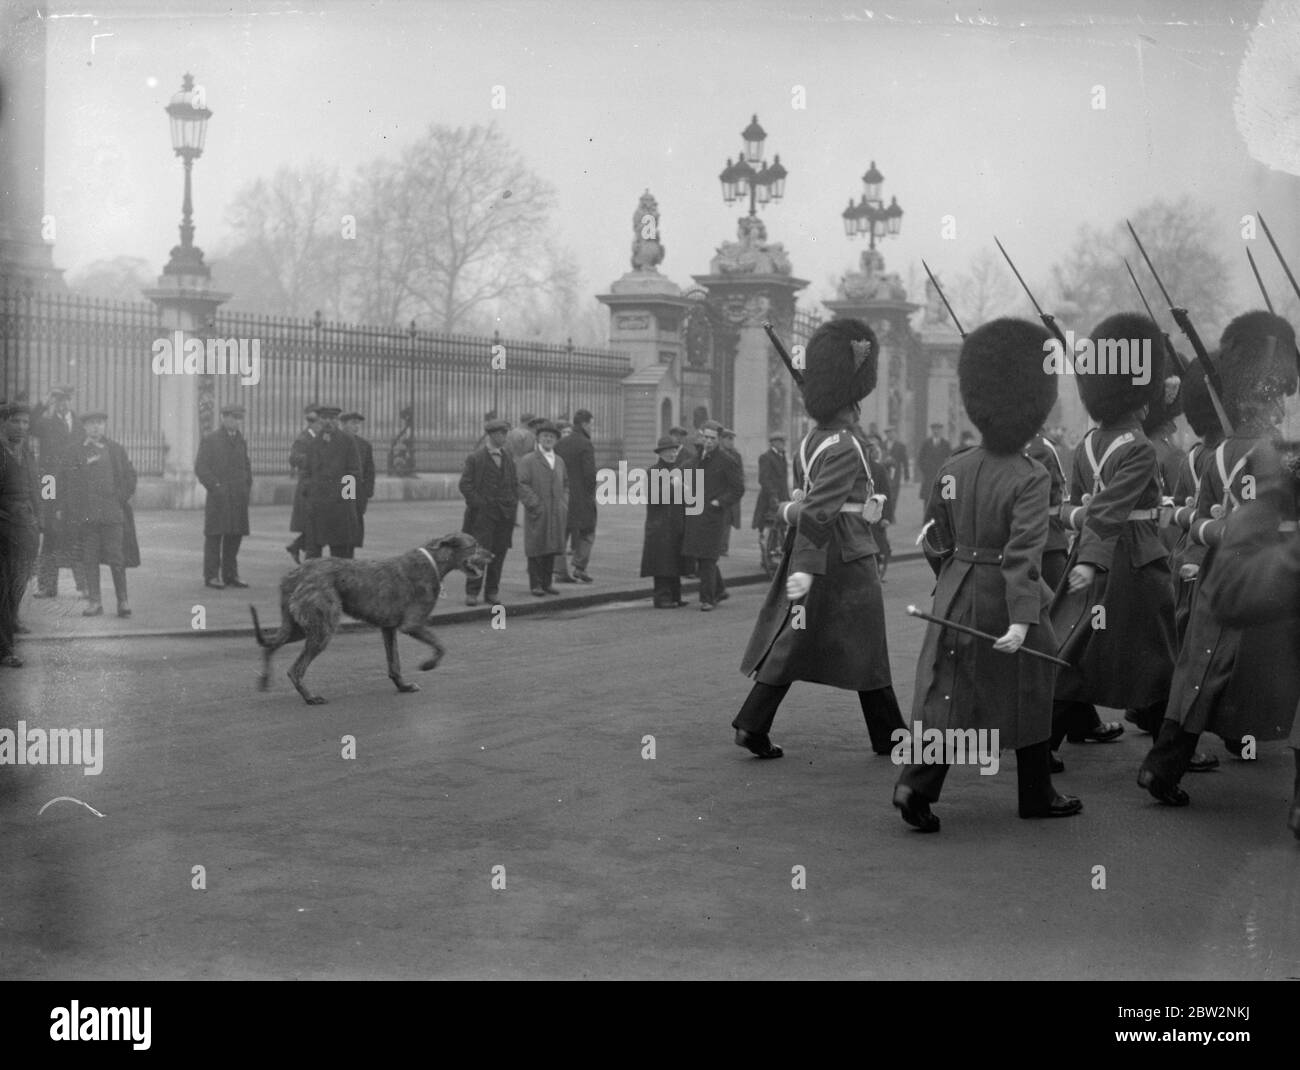 Irish Guards Mascot jumps from car to follow the colours . When the Irish Guards left Buckingham Palace after special duties their mascot dog , who was being driven , past heard the sound of the band and leaped from the car in which he was riding and followed the colours . The dog mascot leading the regiment as they left the palace . 23 February 1932 30s, 30's, 1930s, 1930's, thirties, nineteen thirties Stock Photo